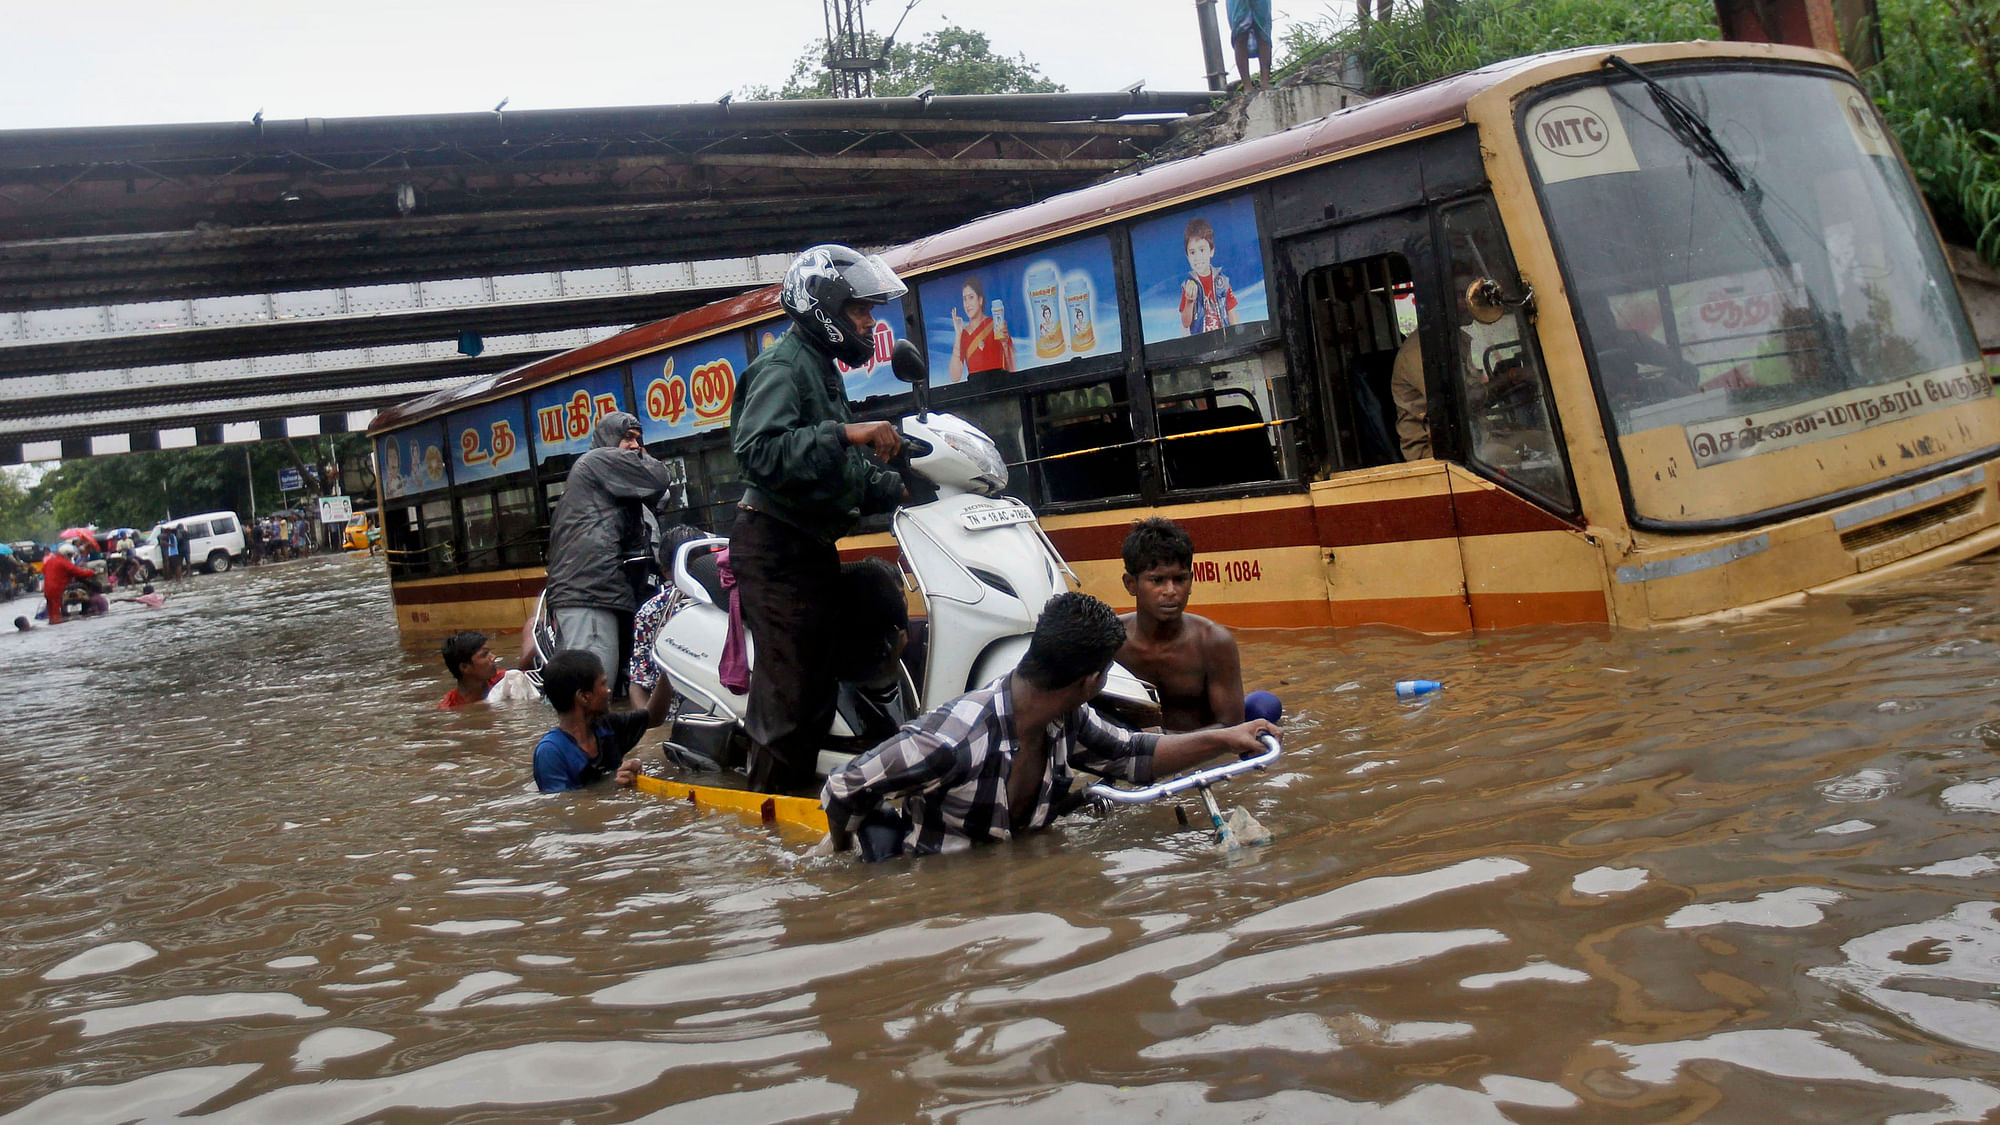  People help a man carry his two-wheeler on a cycle cart as they wade through a waterlogged subway in Chennai, India on Monday, Nov 9, 2015. (Photo: AP)